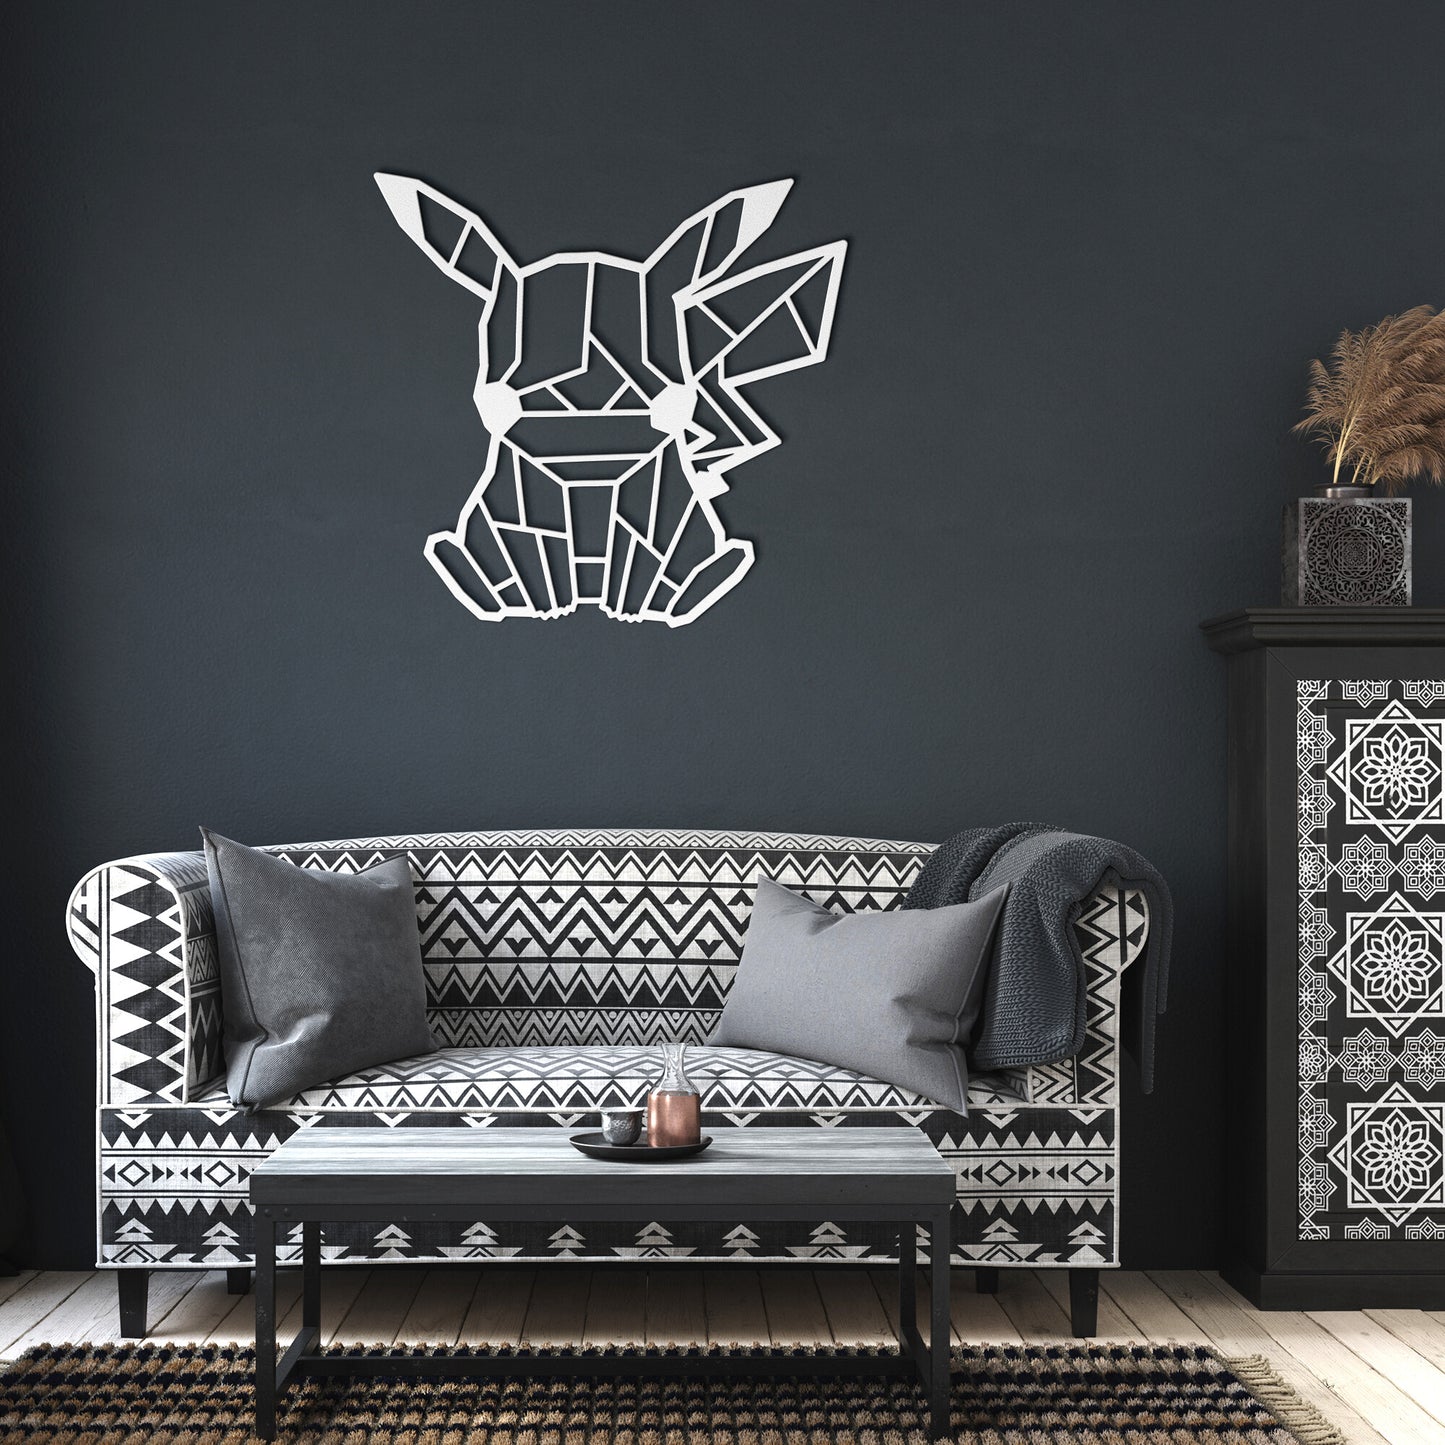 Metal Wall Art Sign of pikachu in geometric style hanging on the wall. This picture shows the design of this pokemon in the color white